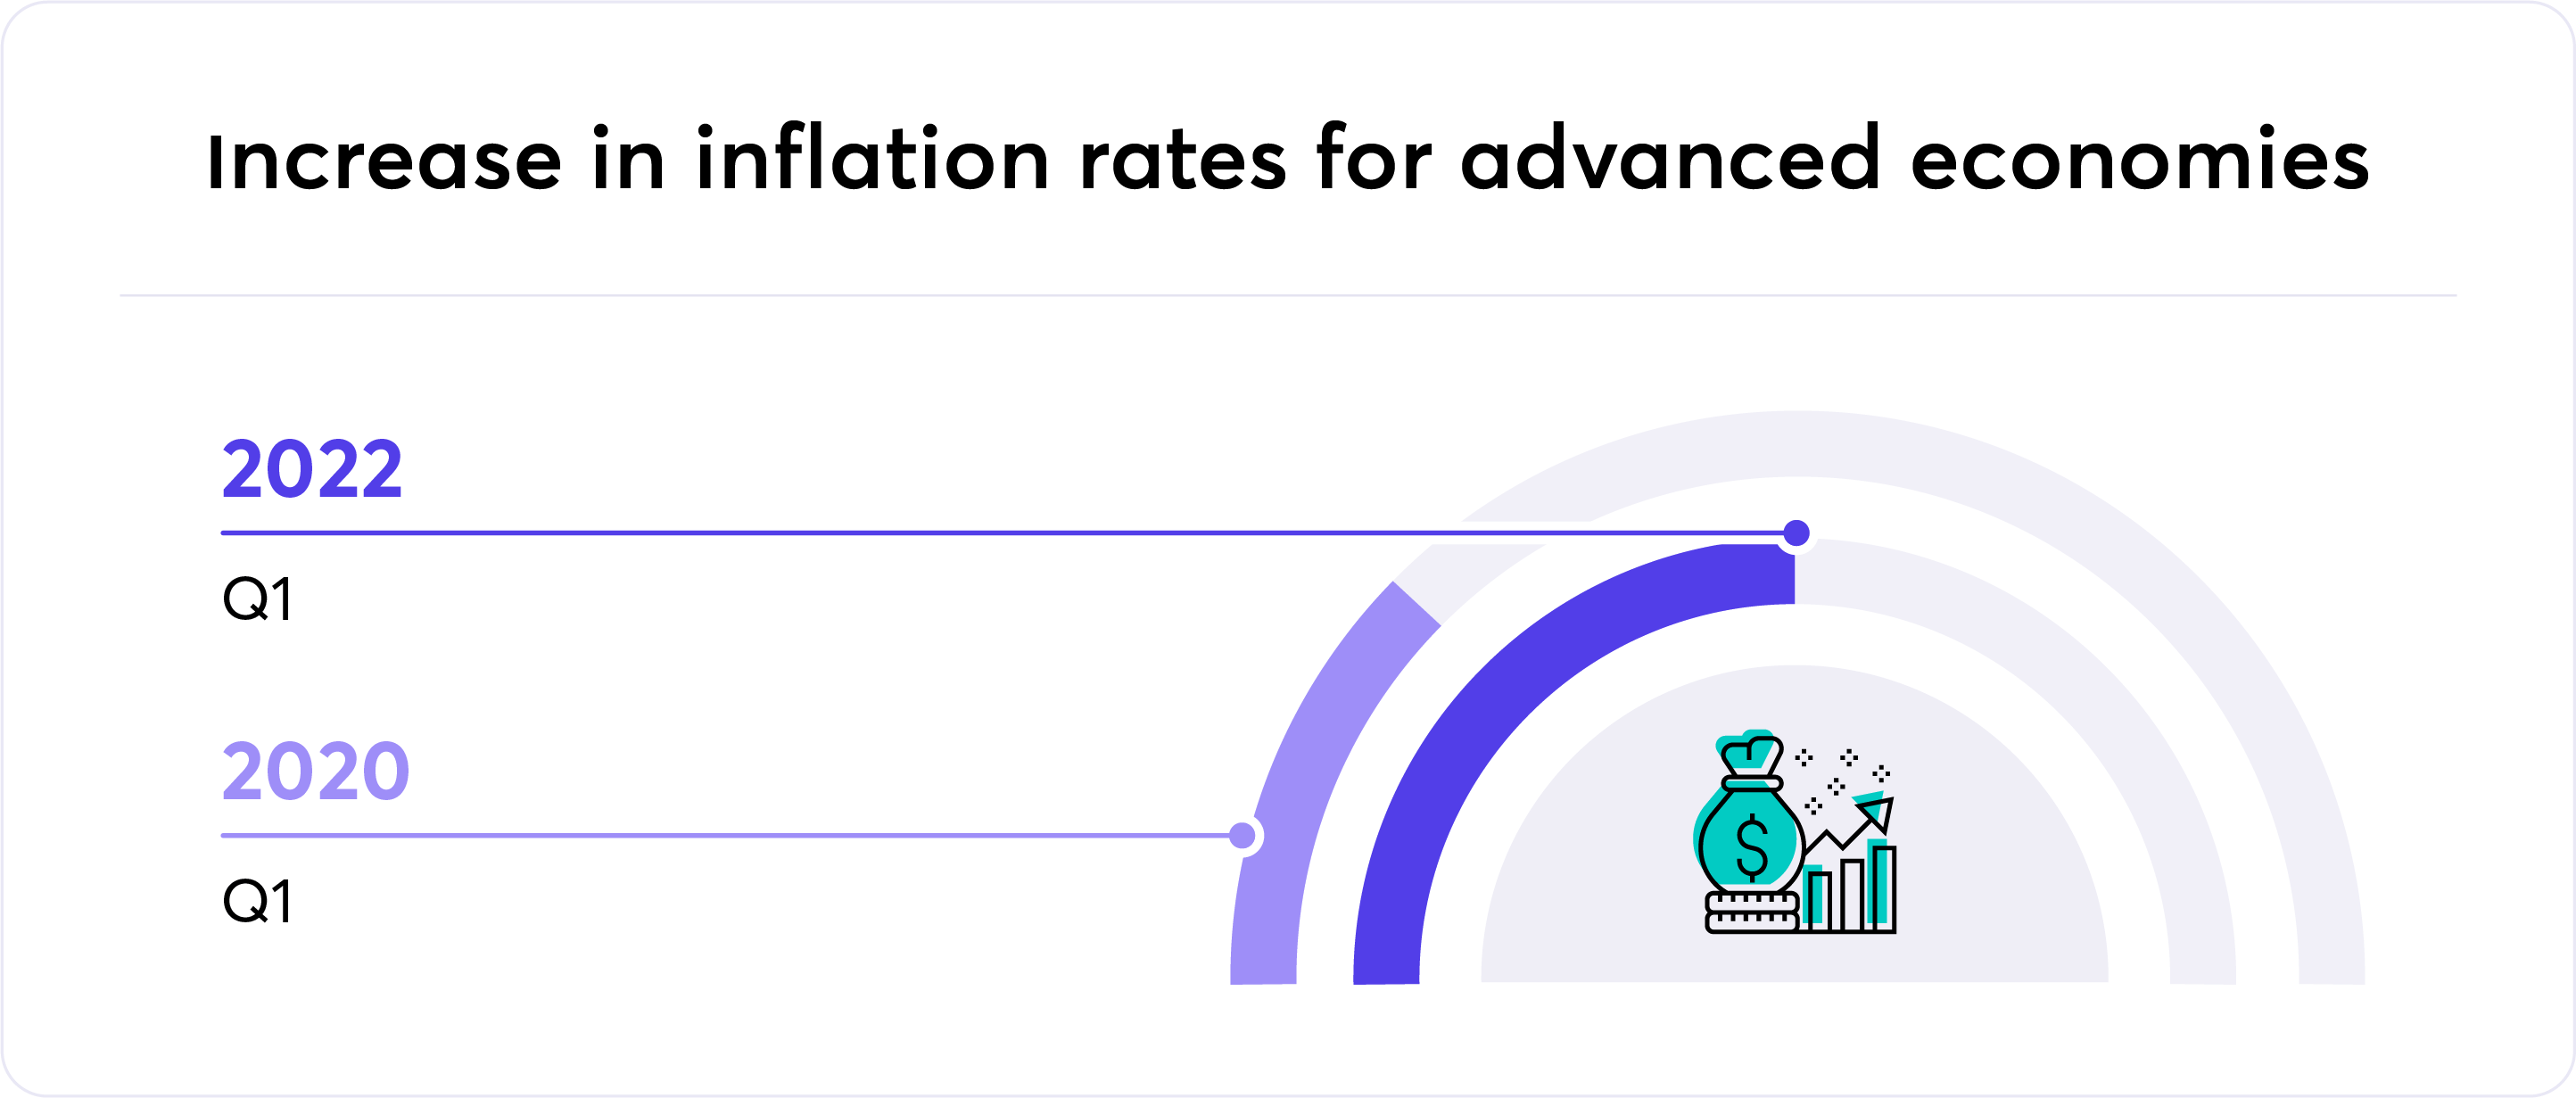 increase in inflation rates for advanced economies graphic